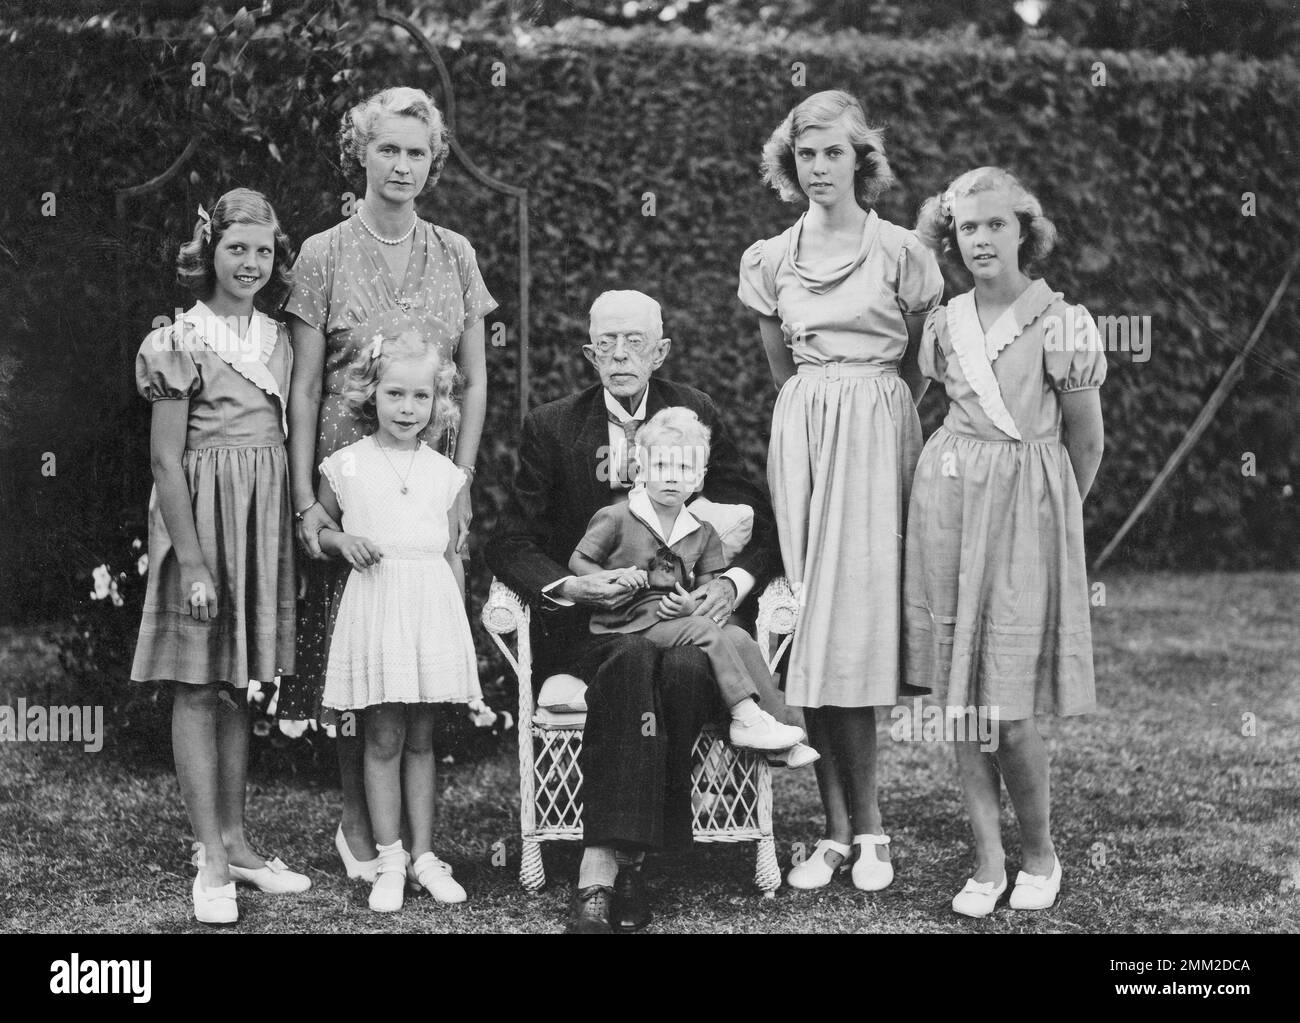 Carl XVI Gustaf, King of Sweden. Born 30 april 1946. King Gustaf the V, 1858-1950 with his great-grandson, Crown Prince Carl Gustaf on his lap. From Left Princess Désirée, Princess Sibylla, Princess Christina, Princess Margaretha, Princess Birgitta. They have gathered on a summer day at the royal family castle Solliden on Öland on August 25, 1949 Stock Photo